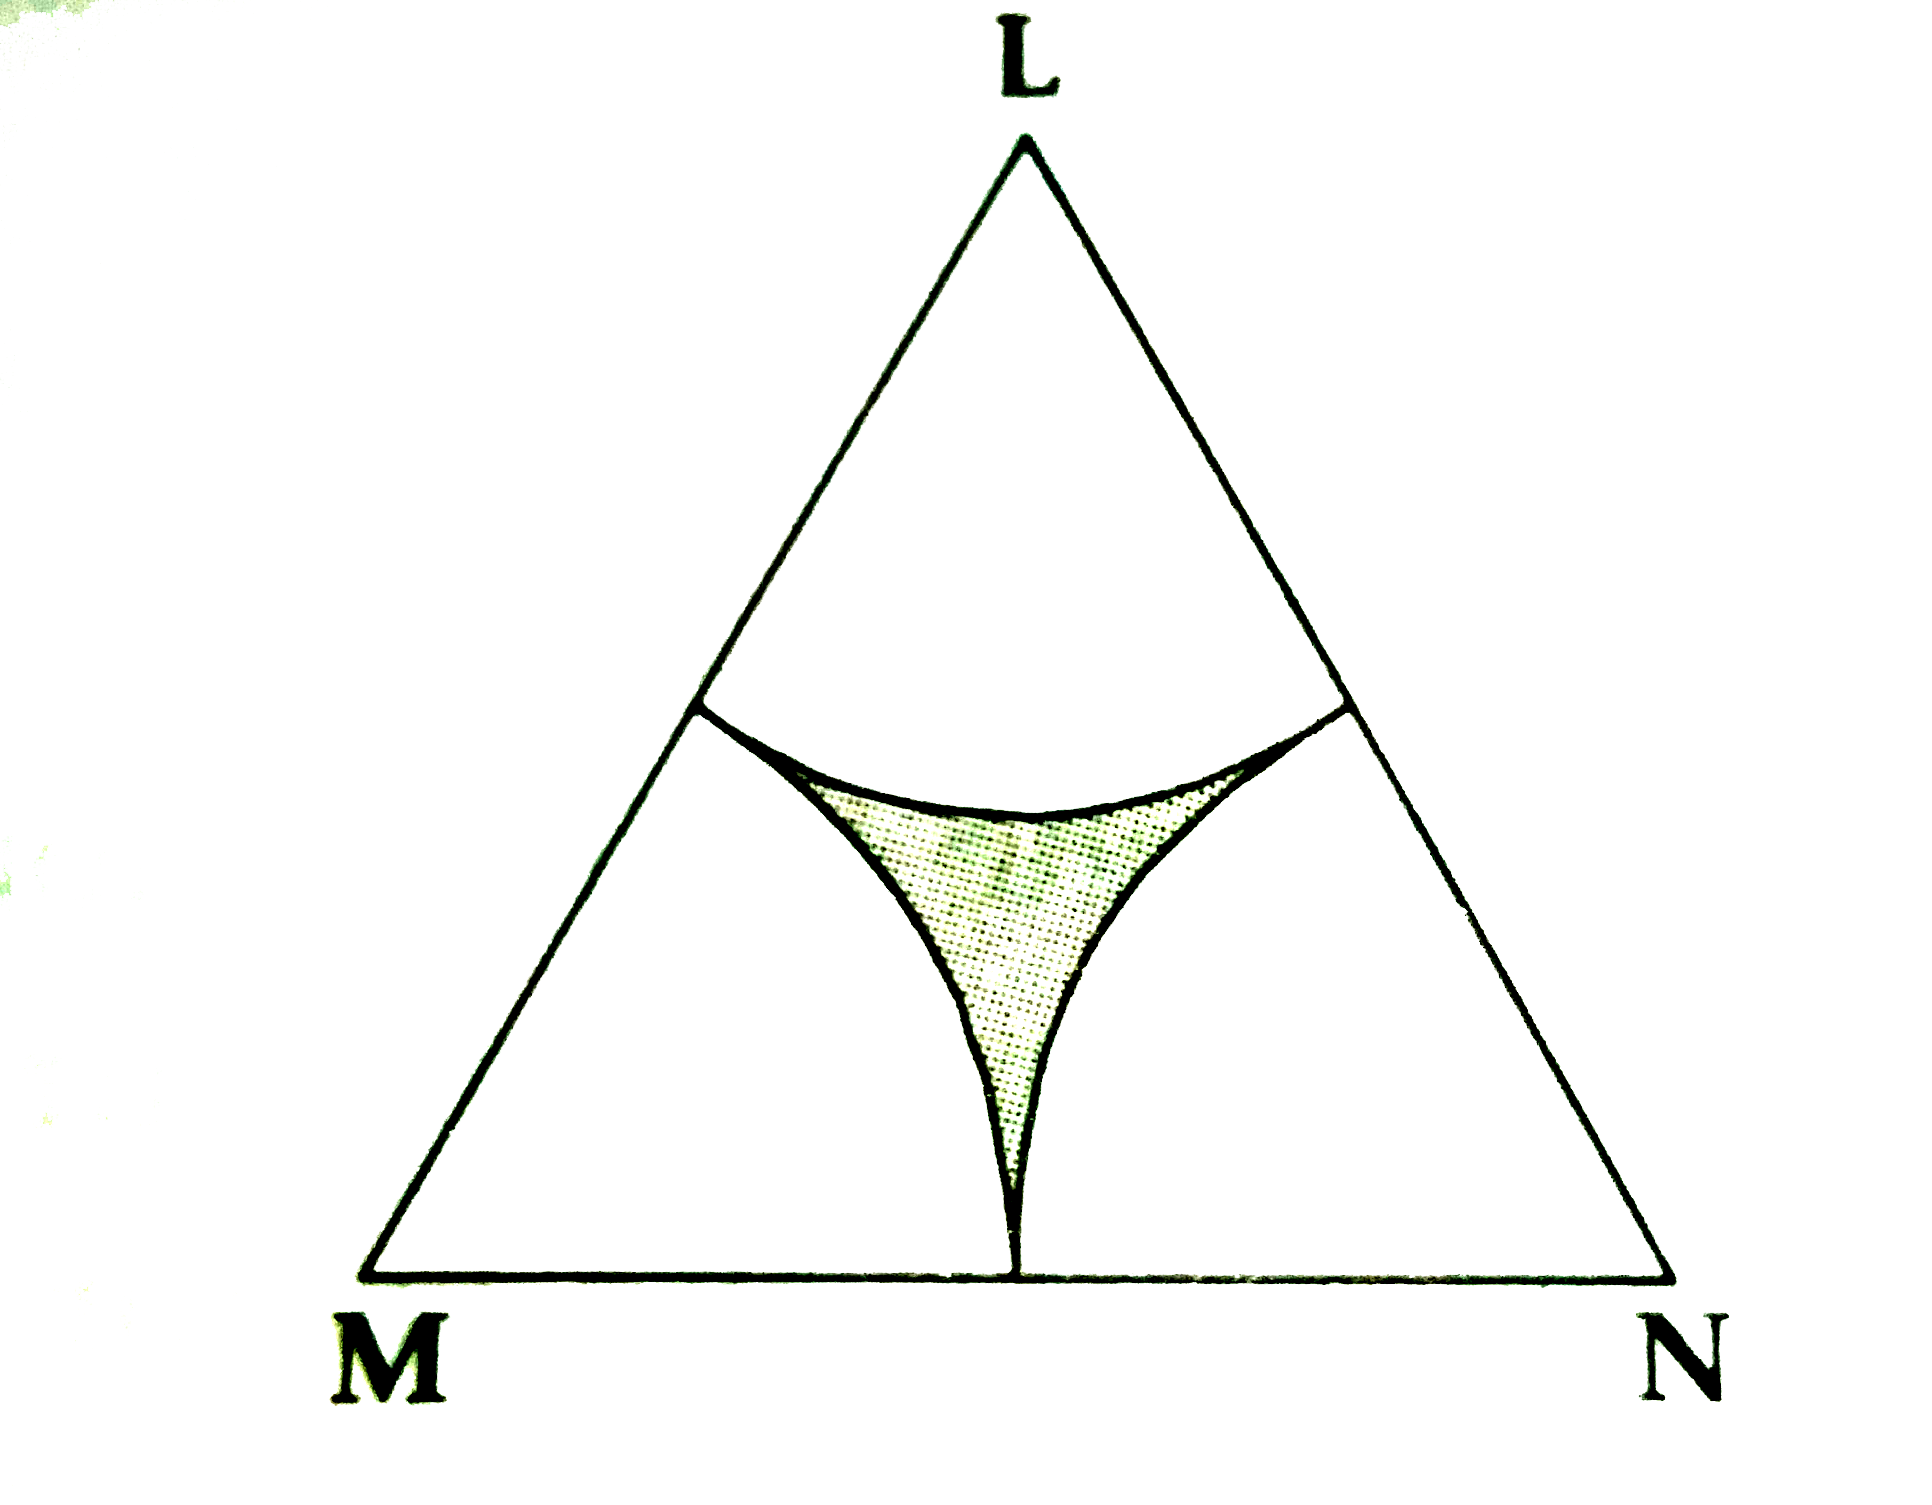 (triangle LMN) is an equilateral triangle .   LM  =14 cm. As shown in figure three sectors are drawn with vertices as certres and radius 7 cm.   Find (1) A(triangleLMN)    (2) Area of any onne of the sectors.   (3) Total area of all the three sectors.   (4) Area of ther shaded region.    Given:   triangleLMN is an equilateral triangle.   LM=14cm   Radius of each sector =r=7cm   To find: (1) A(triangleLMN) (2) Area of any sector   (3) Total area of three sector   (4) A(shaded region)